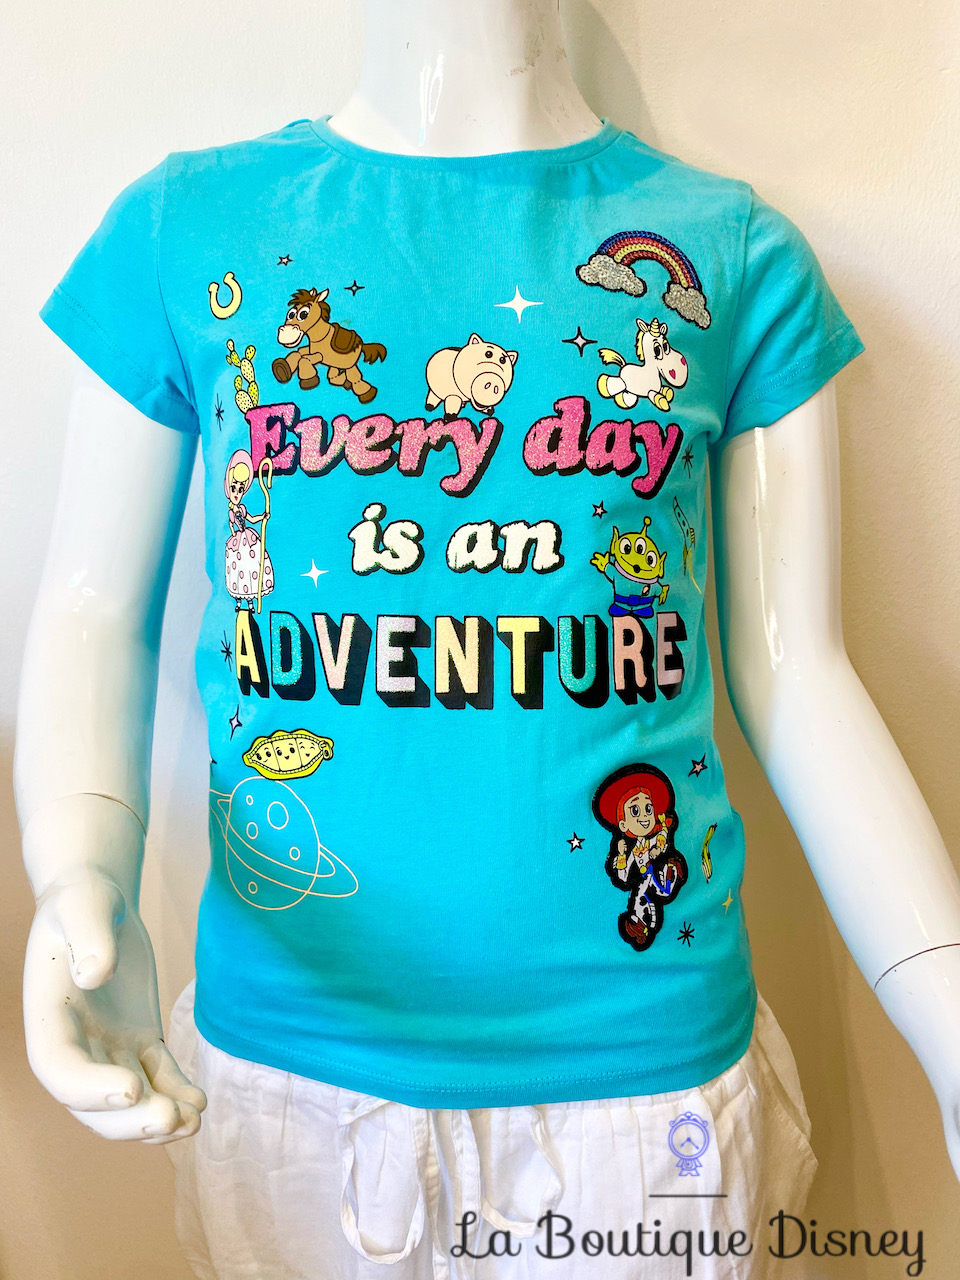 tee-shirt-toy-story-disney-store-every-day-is-an-adventure (1)